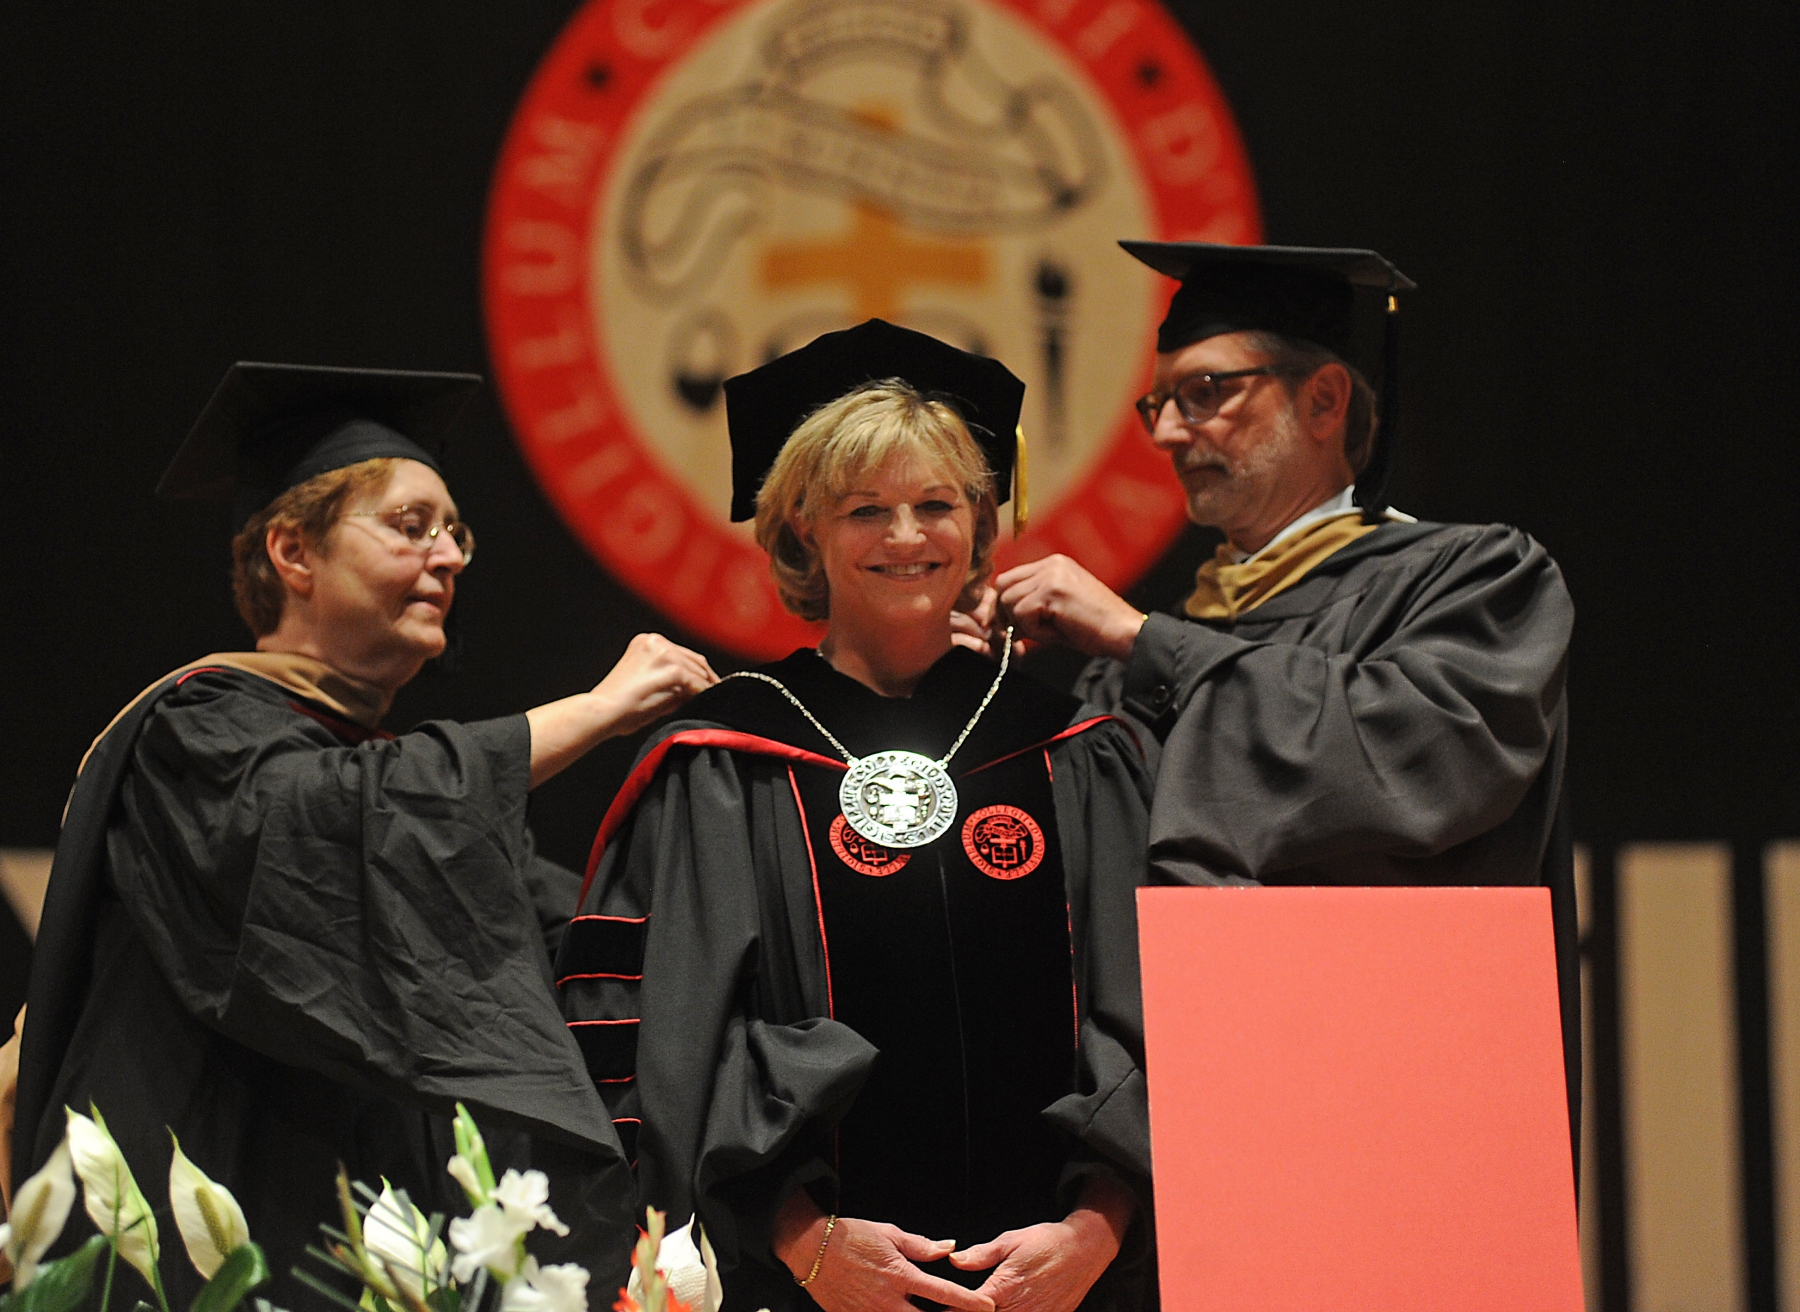 Sister Julia C. Lanigan, president, Grey Nuns of the Sacred Heart, and Charles Urlaub, Chairman, D'Youville College Board of Trustees, place the D'Youville Presidential Medallion on Lorrie A. Clemo, Ph.D. during a ceremony at Kleinhans Music Hall. Clemo is the 15th president of the college.
Dan Cappellazzo/Staff photographer
